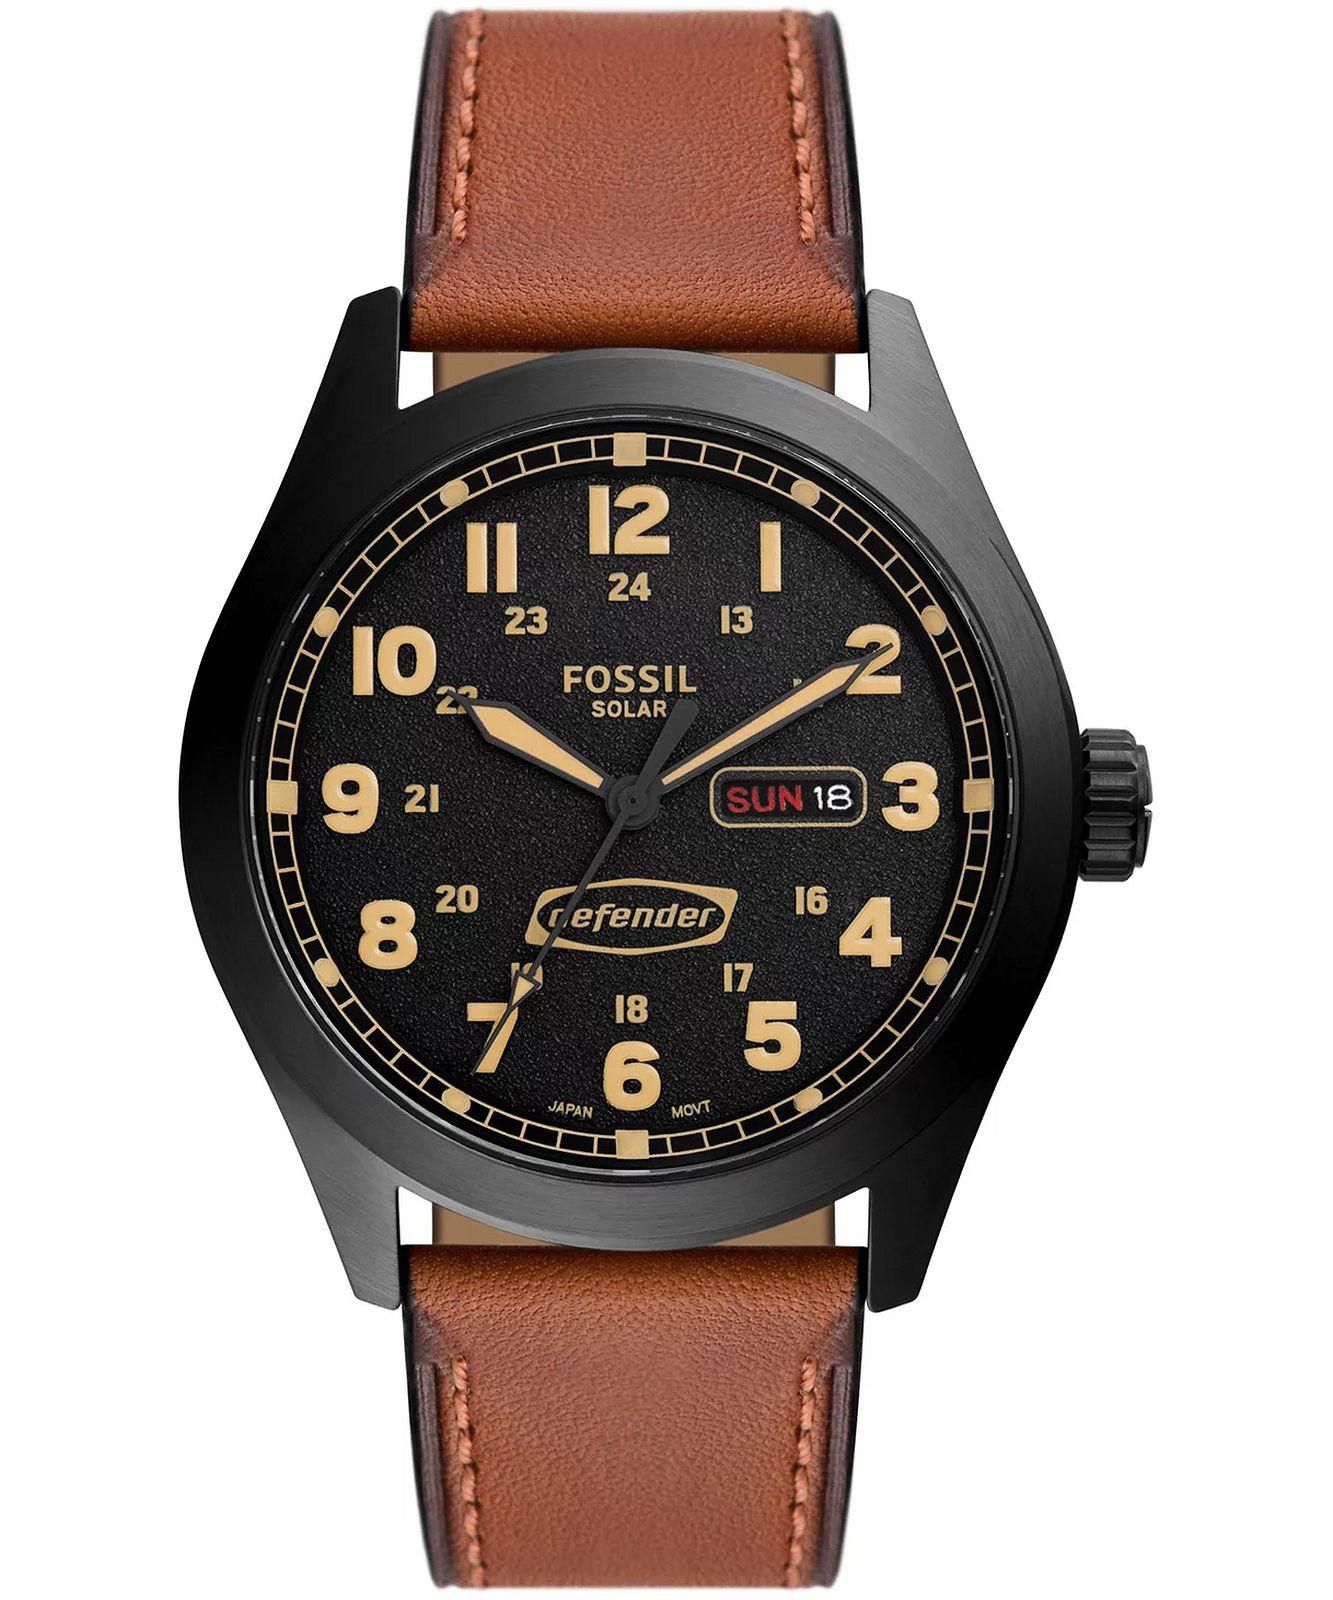 Fossil Defender Solar - FS5978, Black case with Brown Leather Strap